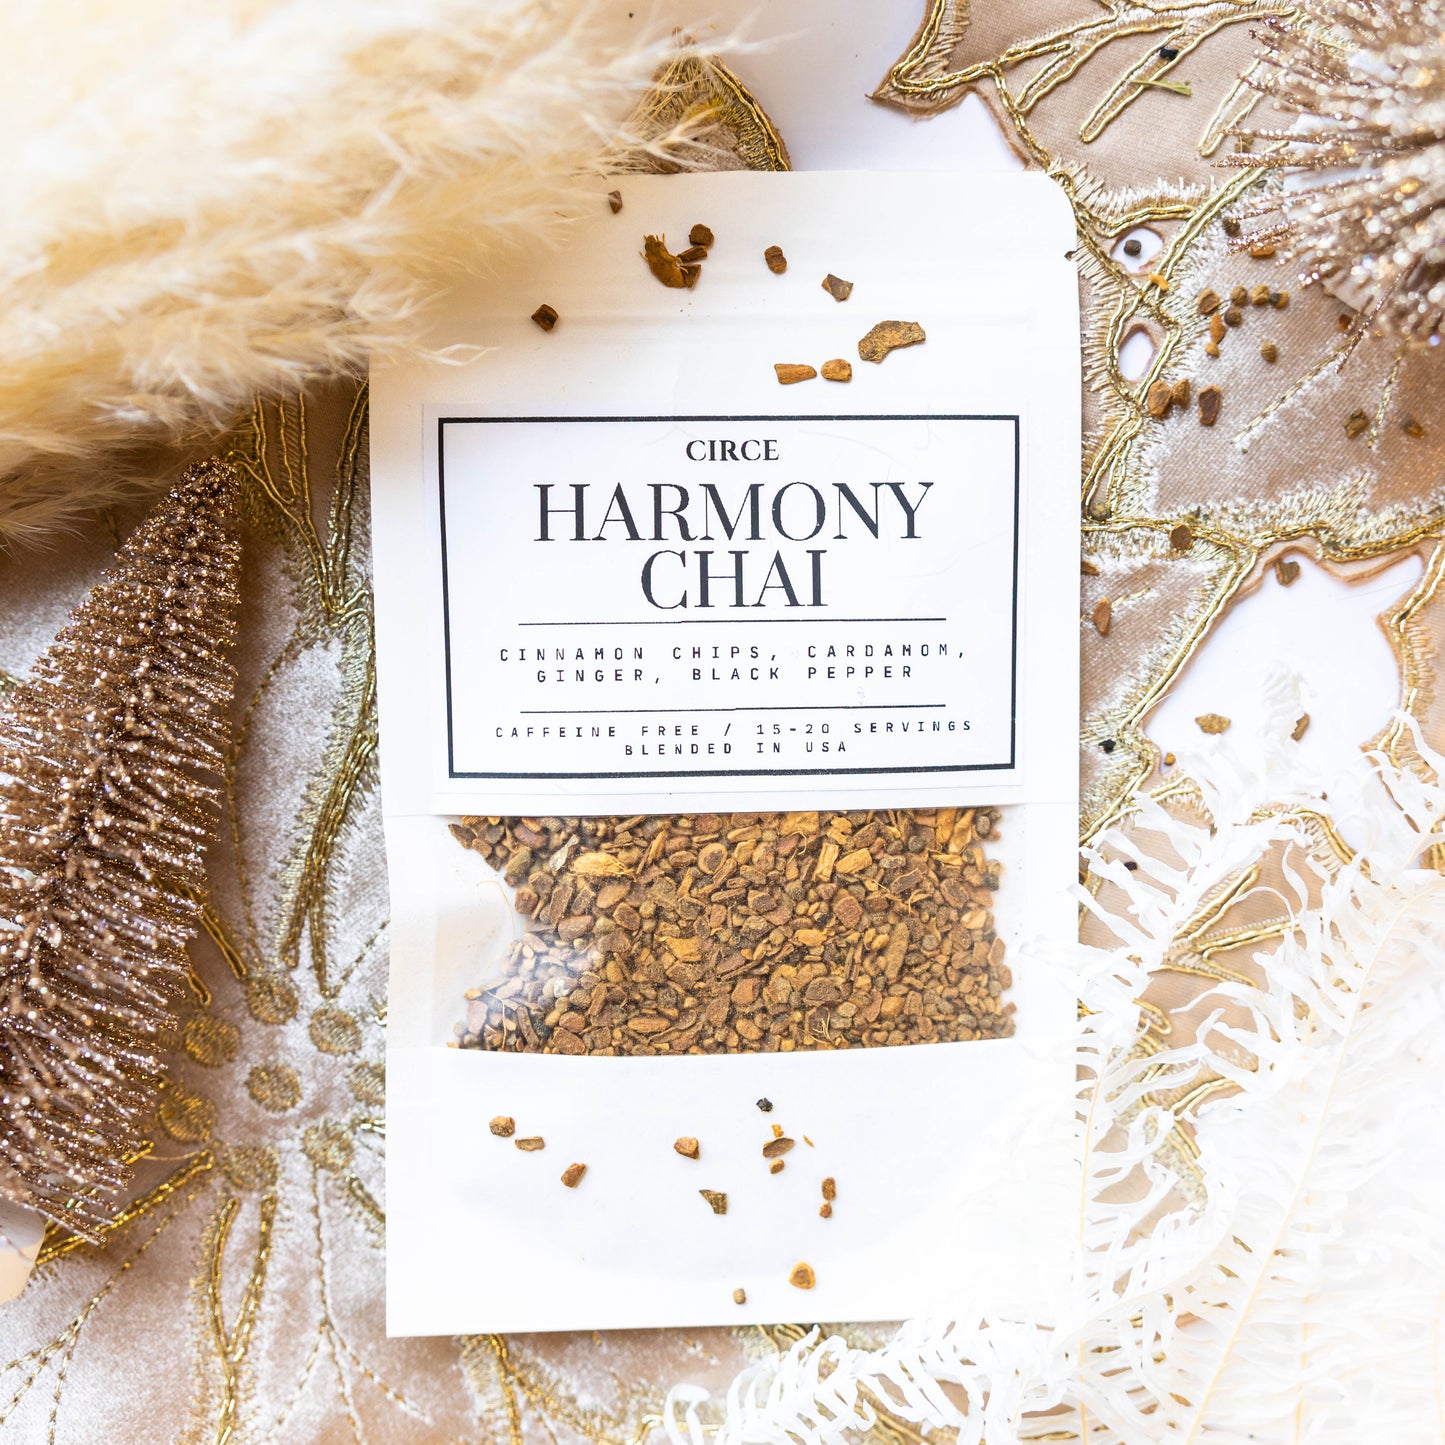 Harmony Chai - Circe Tea Blends  from Circe Boutique